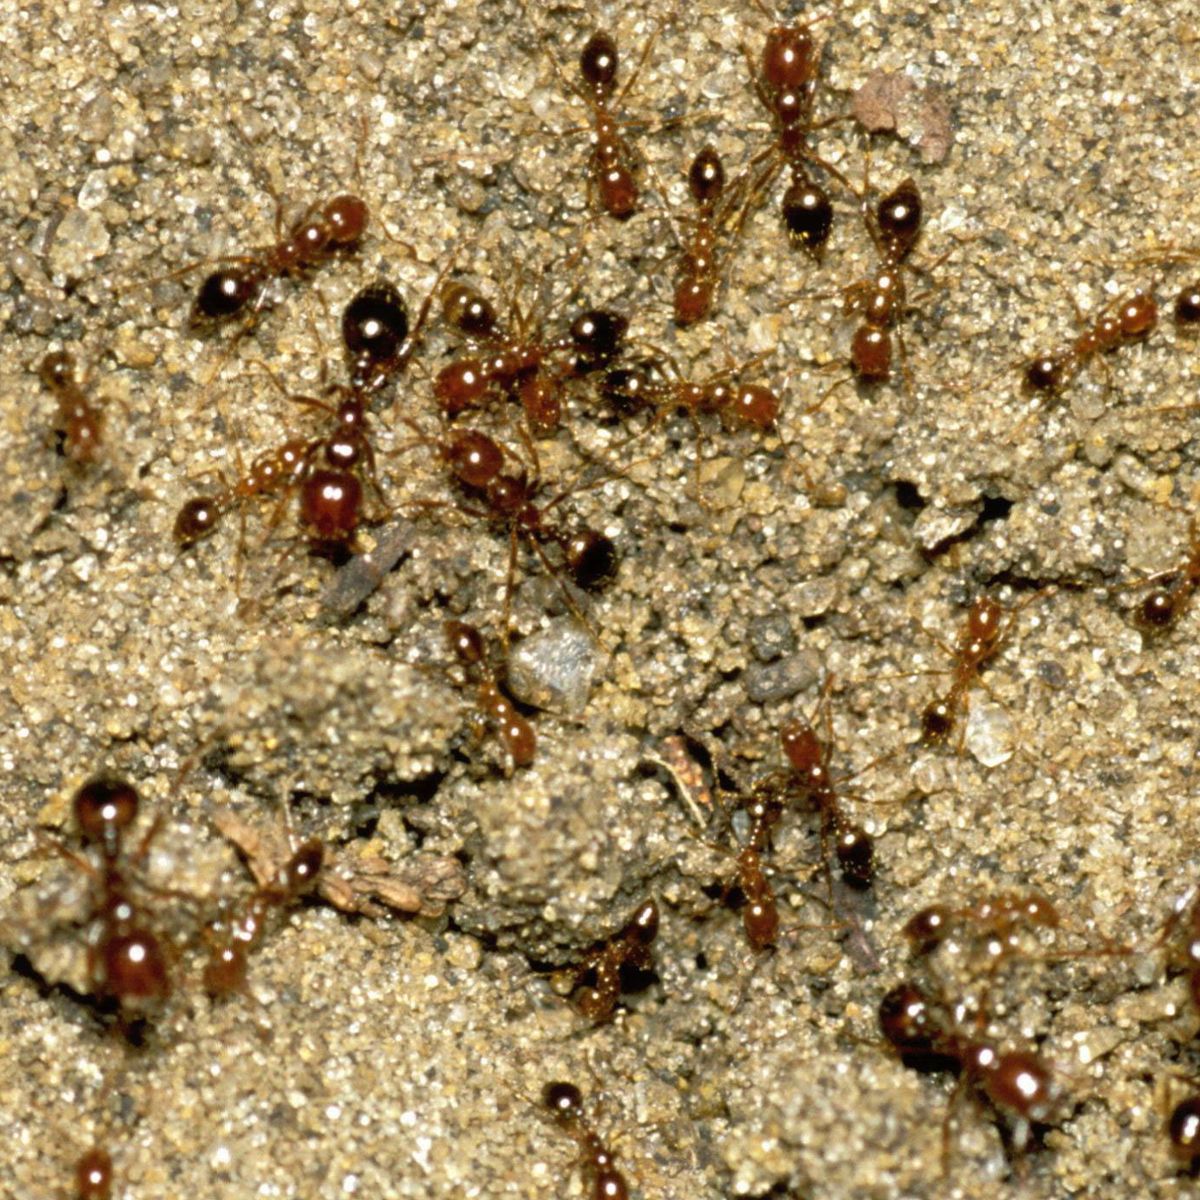 Millions of Aussies will feel pain of fire ants if eradication 'war' fails